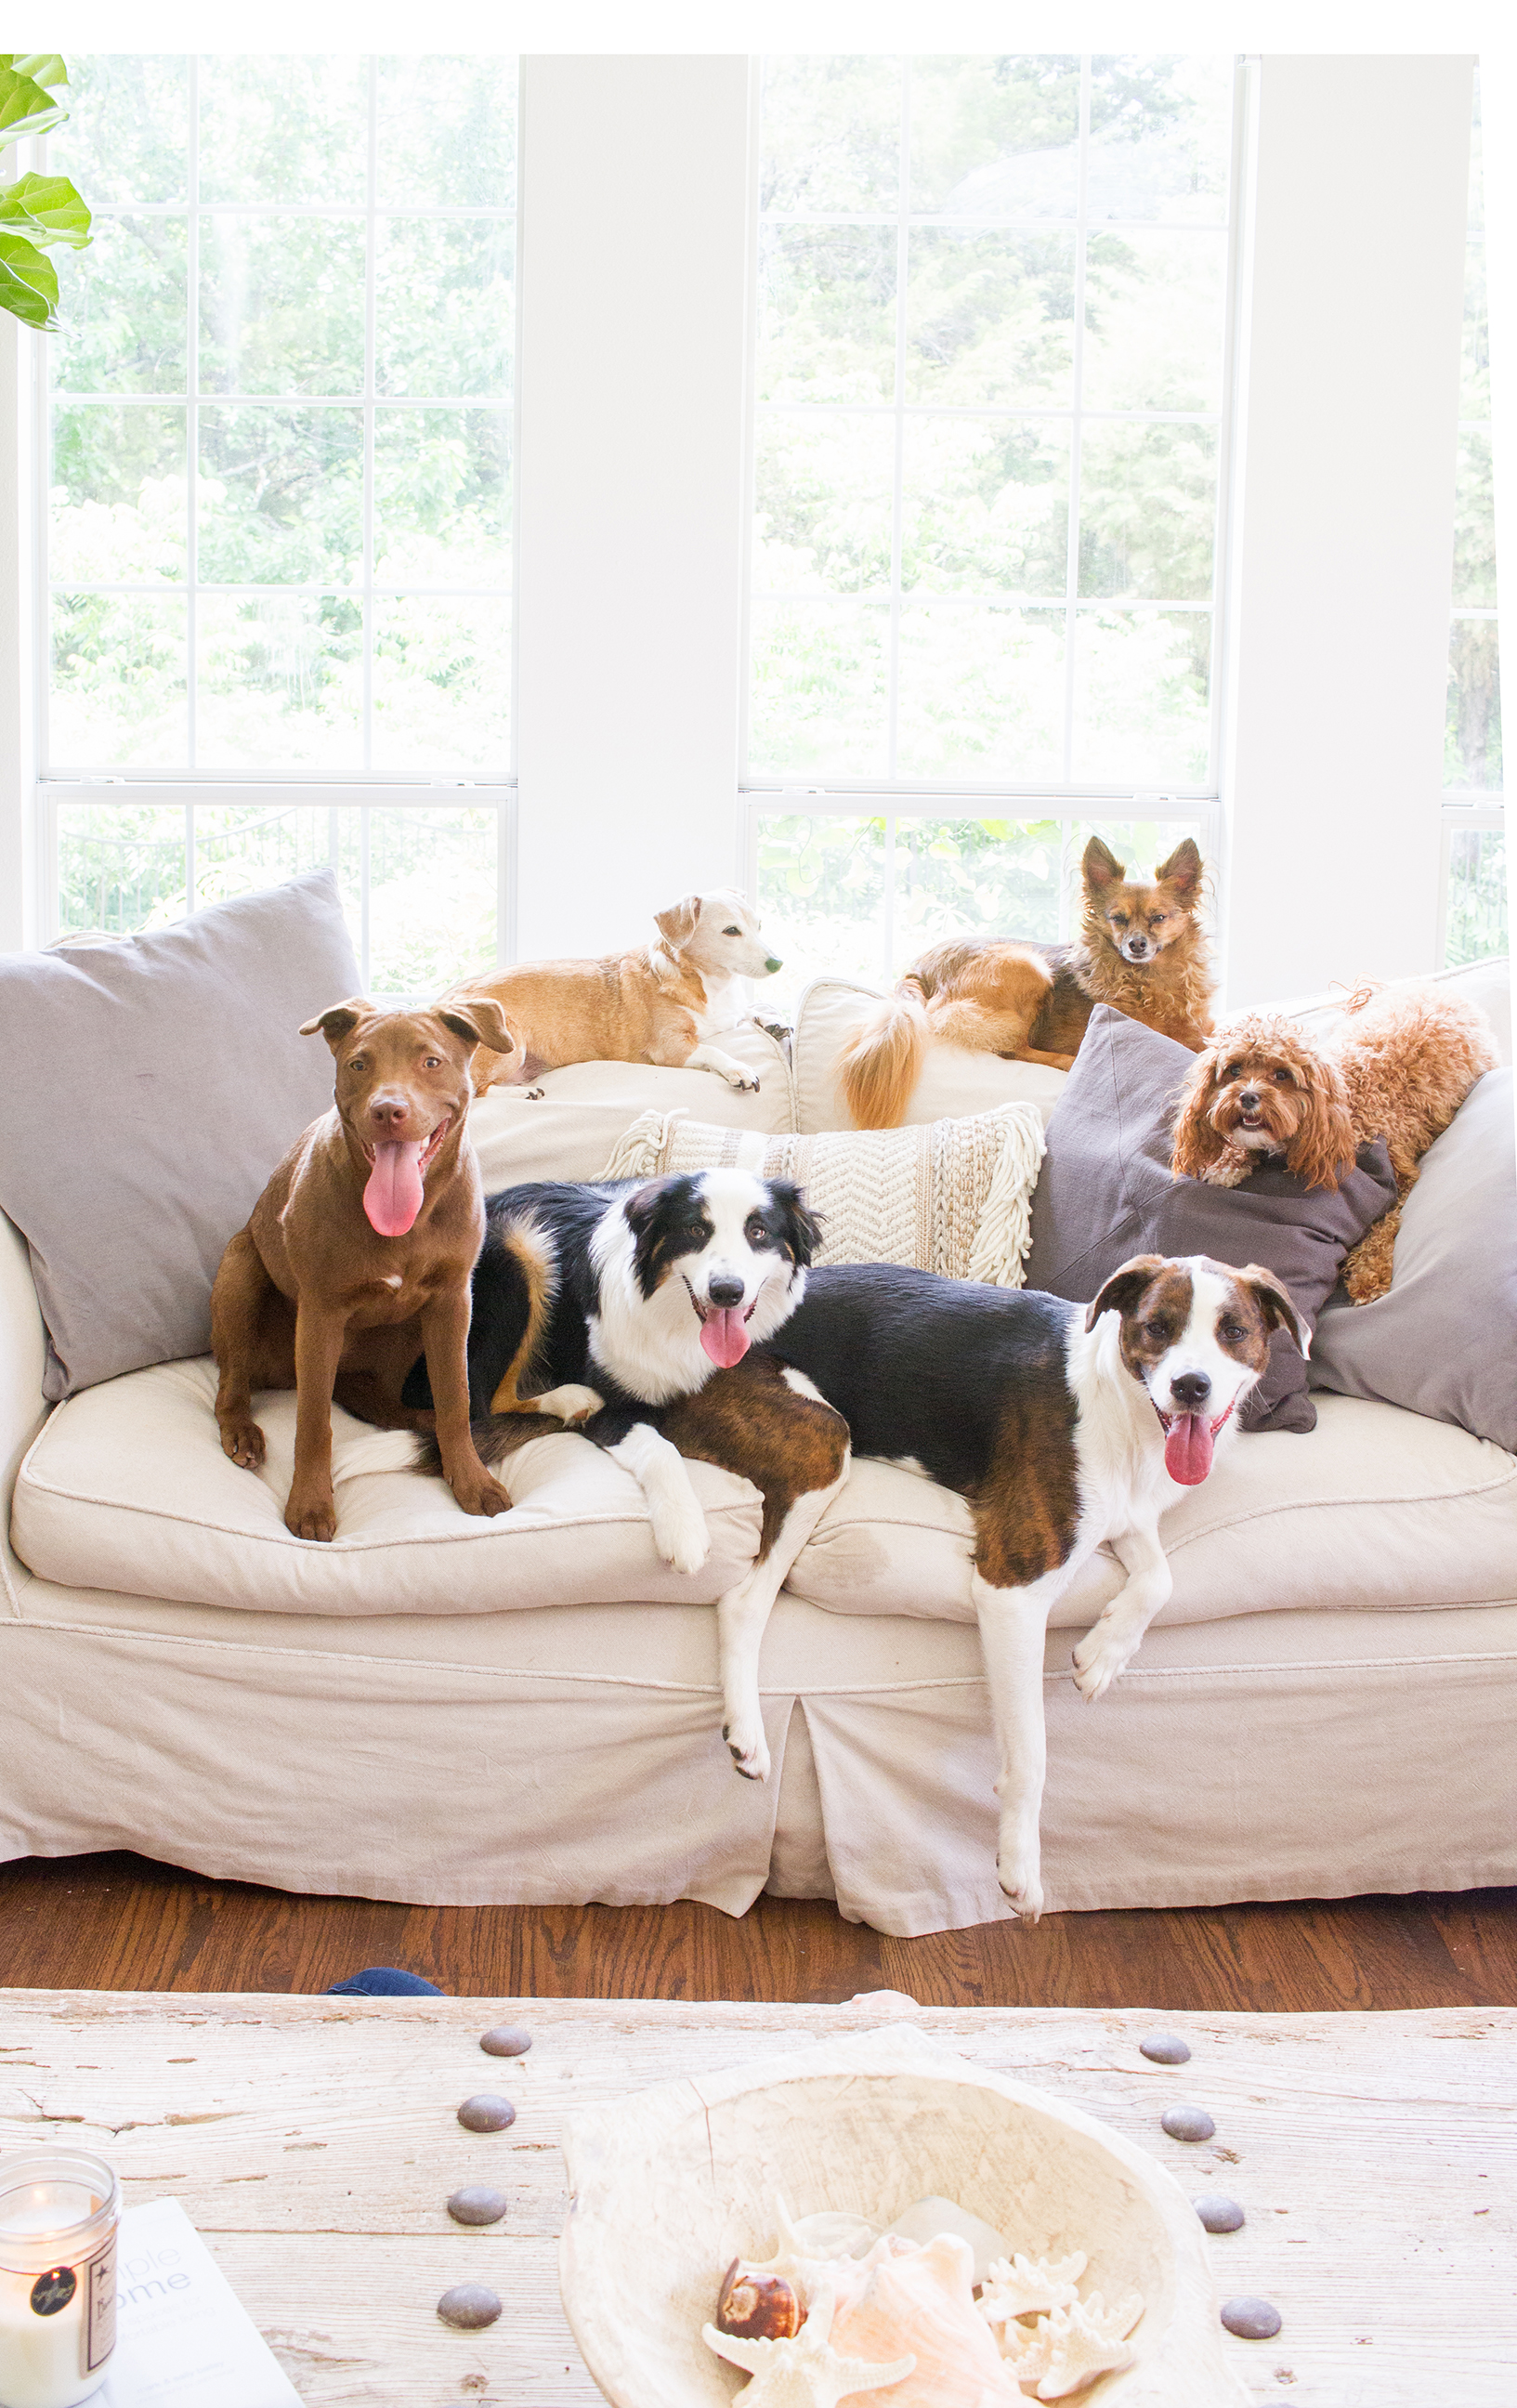 Dogs and Decor - Pet Friendly Design